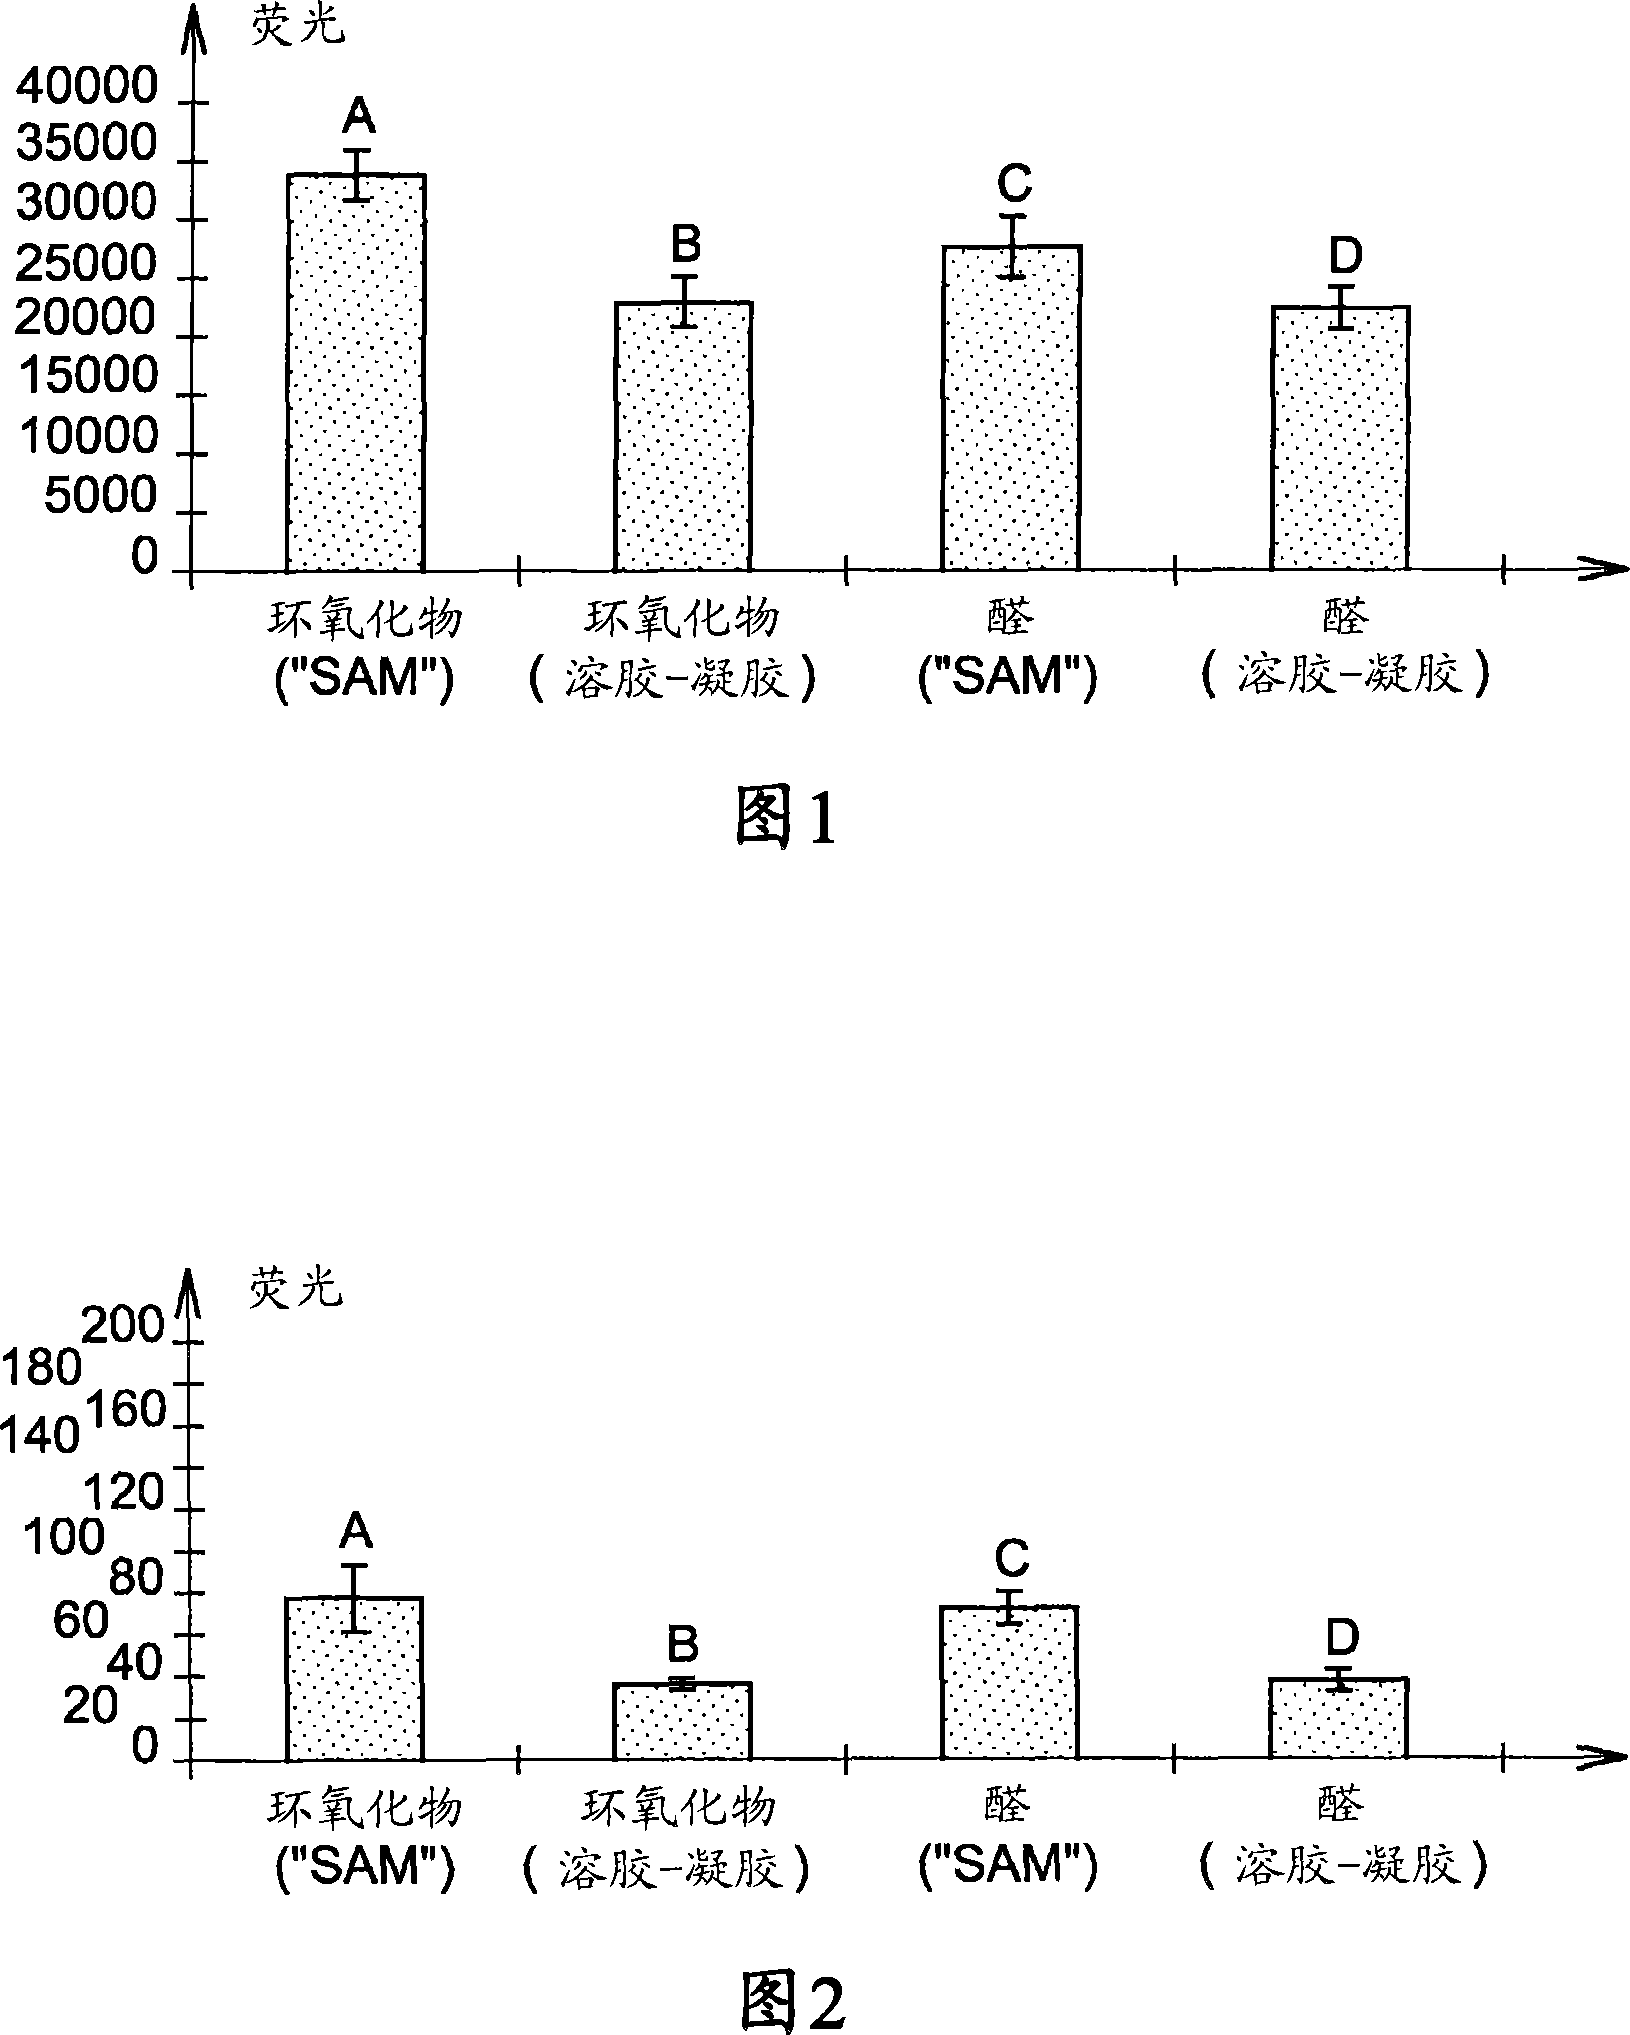 Sol-gel process for the functionalisation of a surface of a solid substrate